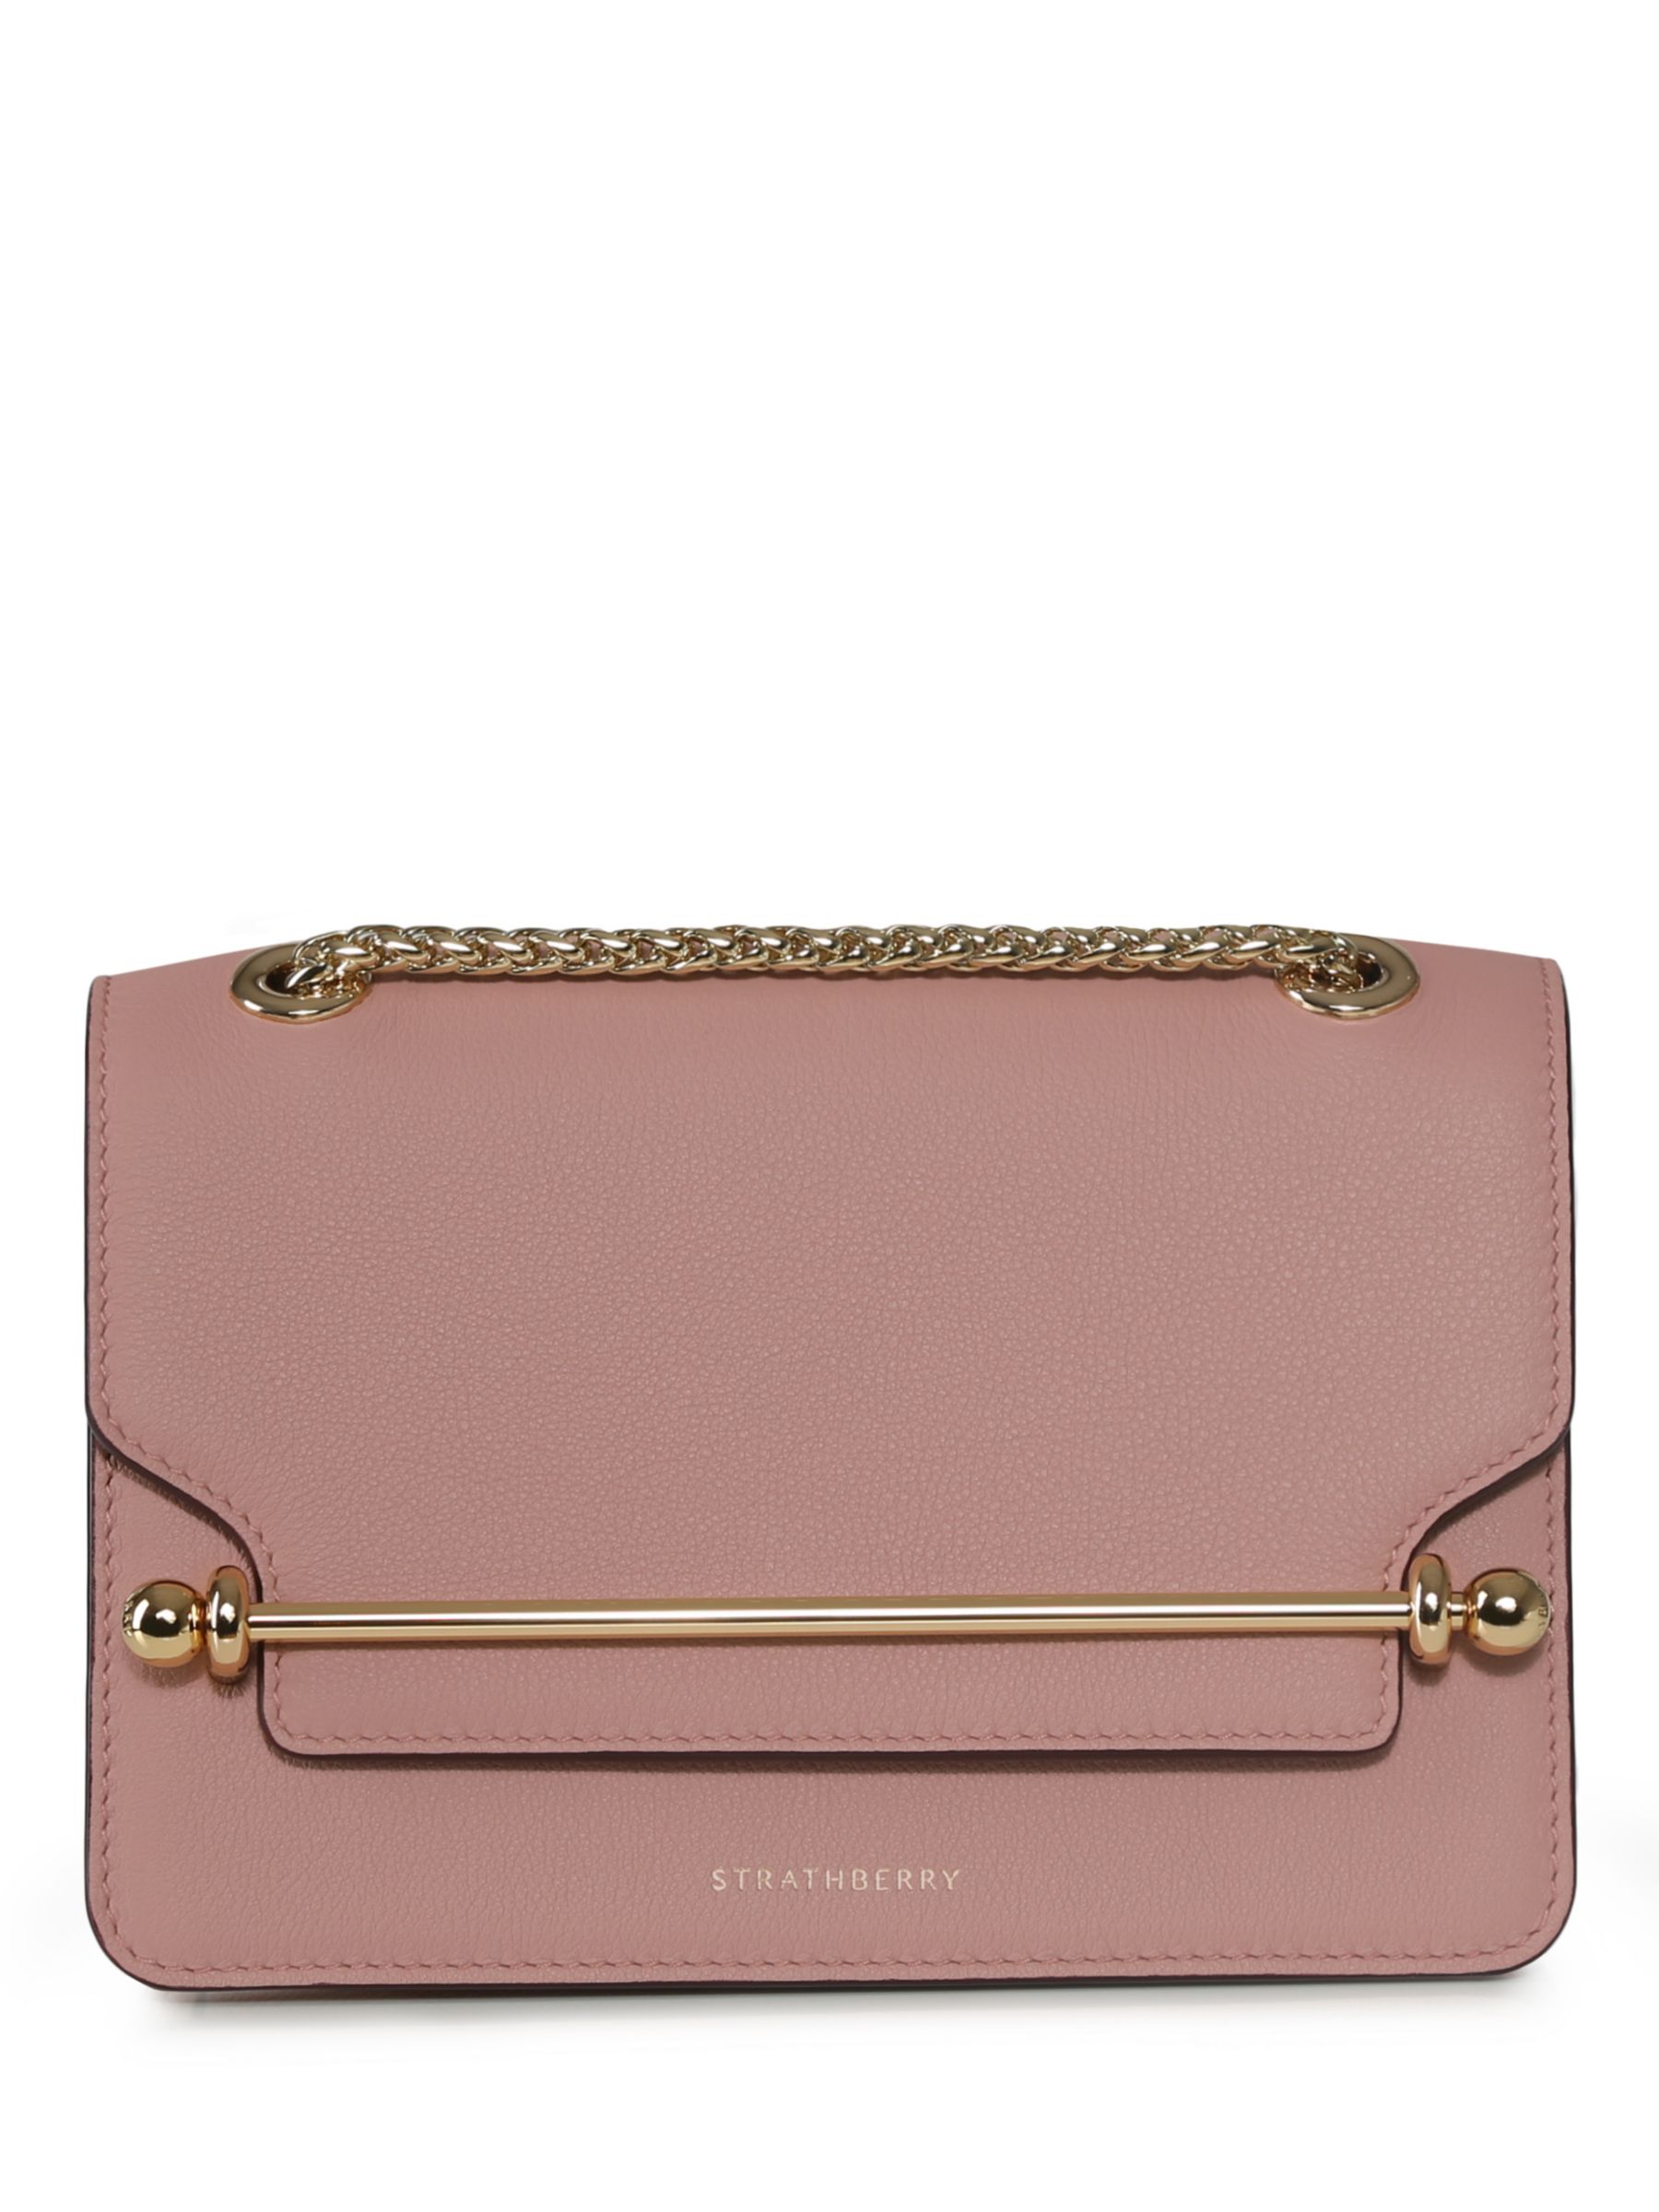 Strathberry East/West Mini Leather Cross Body Bag, Blush Rose at John ...